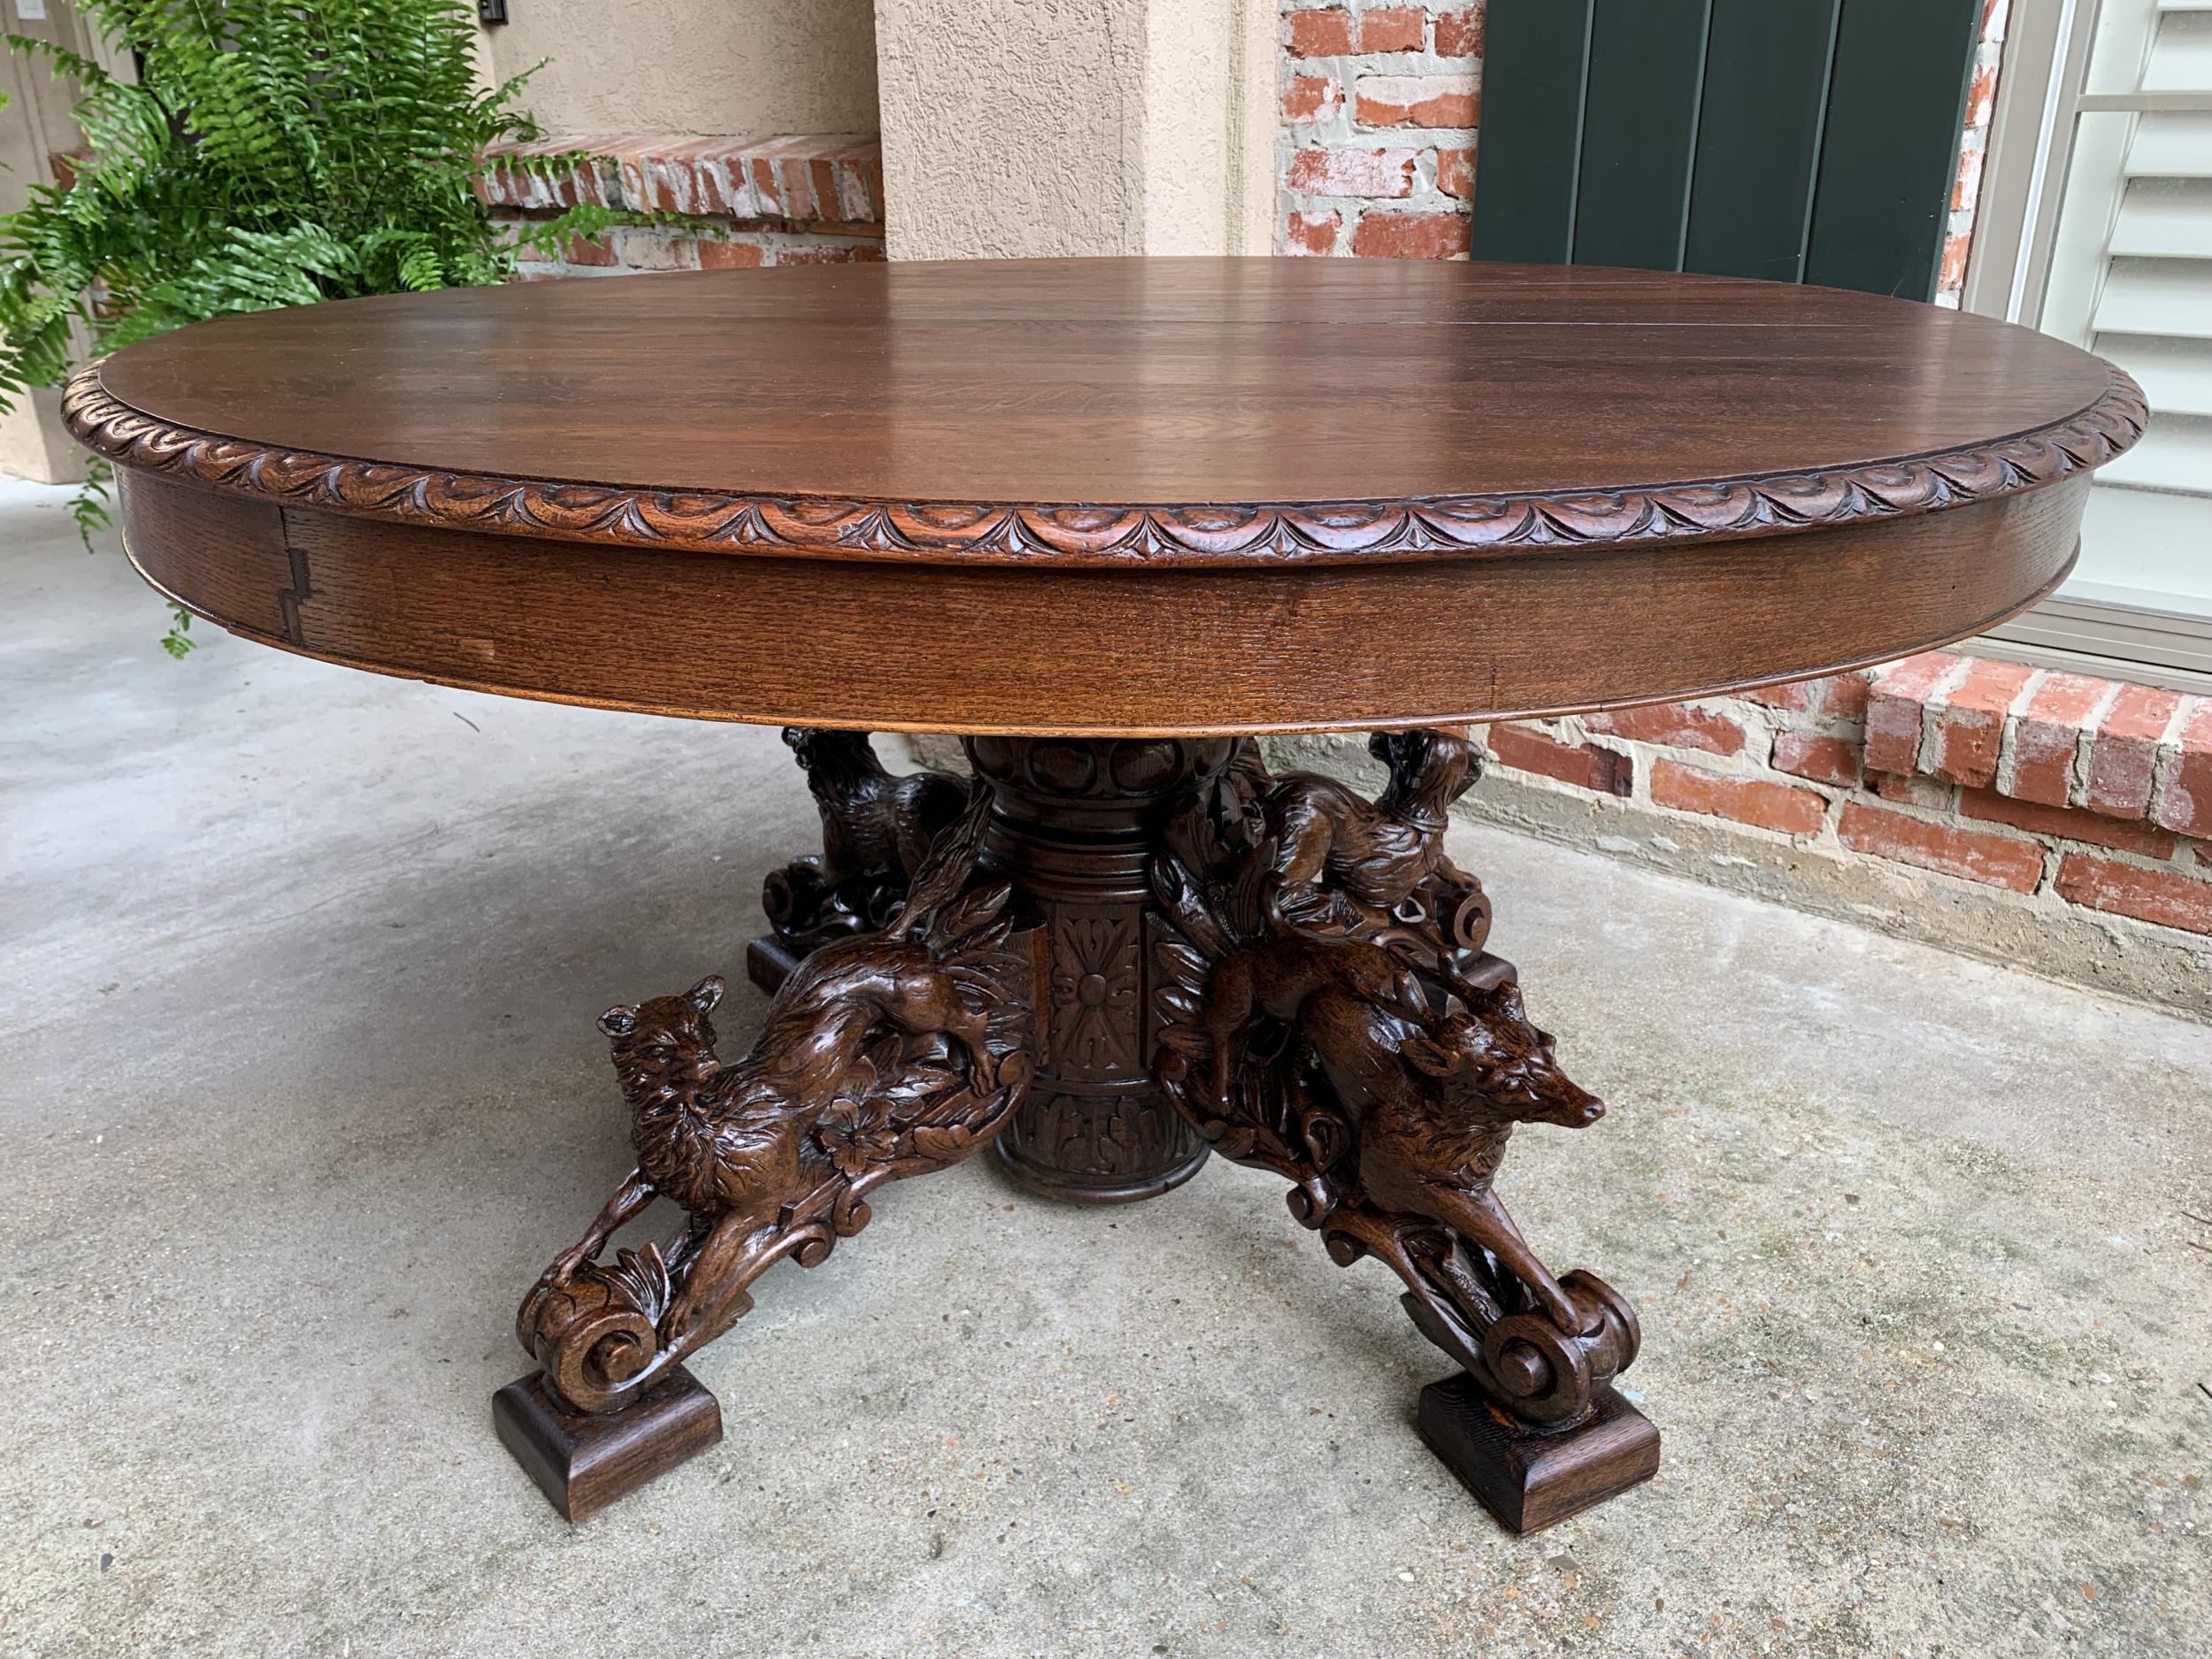 19th century French carved oak oval dining Hunt table Black Forest animal lodge

~Direct from France~
~Majestic and substantial antique French “hunt” oval dining table~
~Stunning hand carved details; one glance reveals the superior quality of